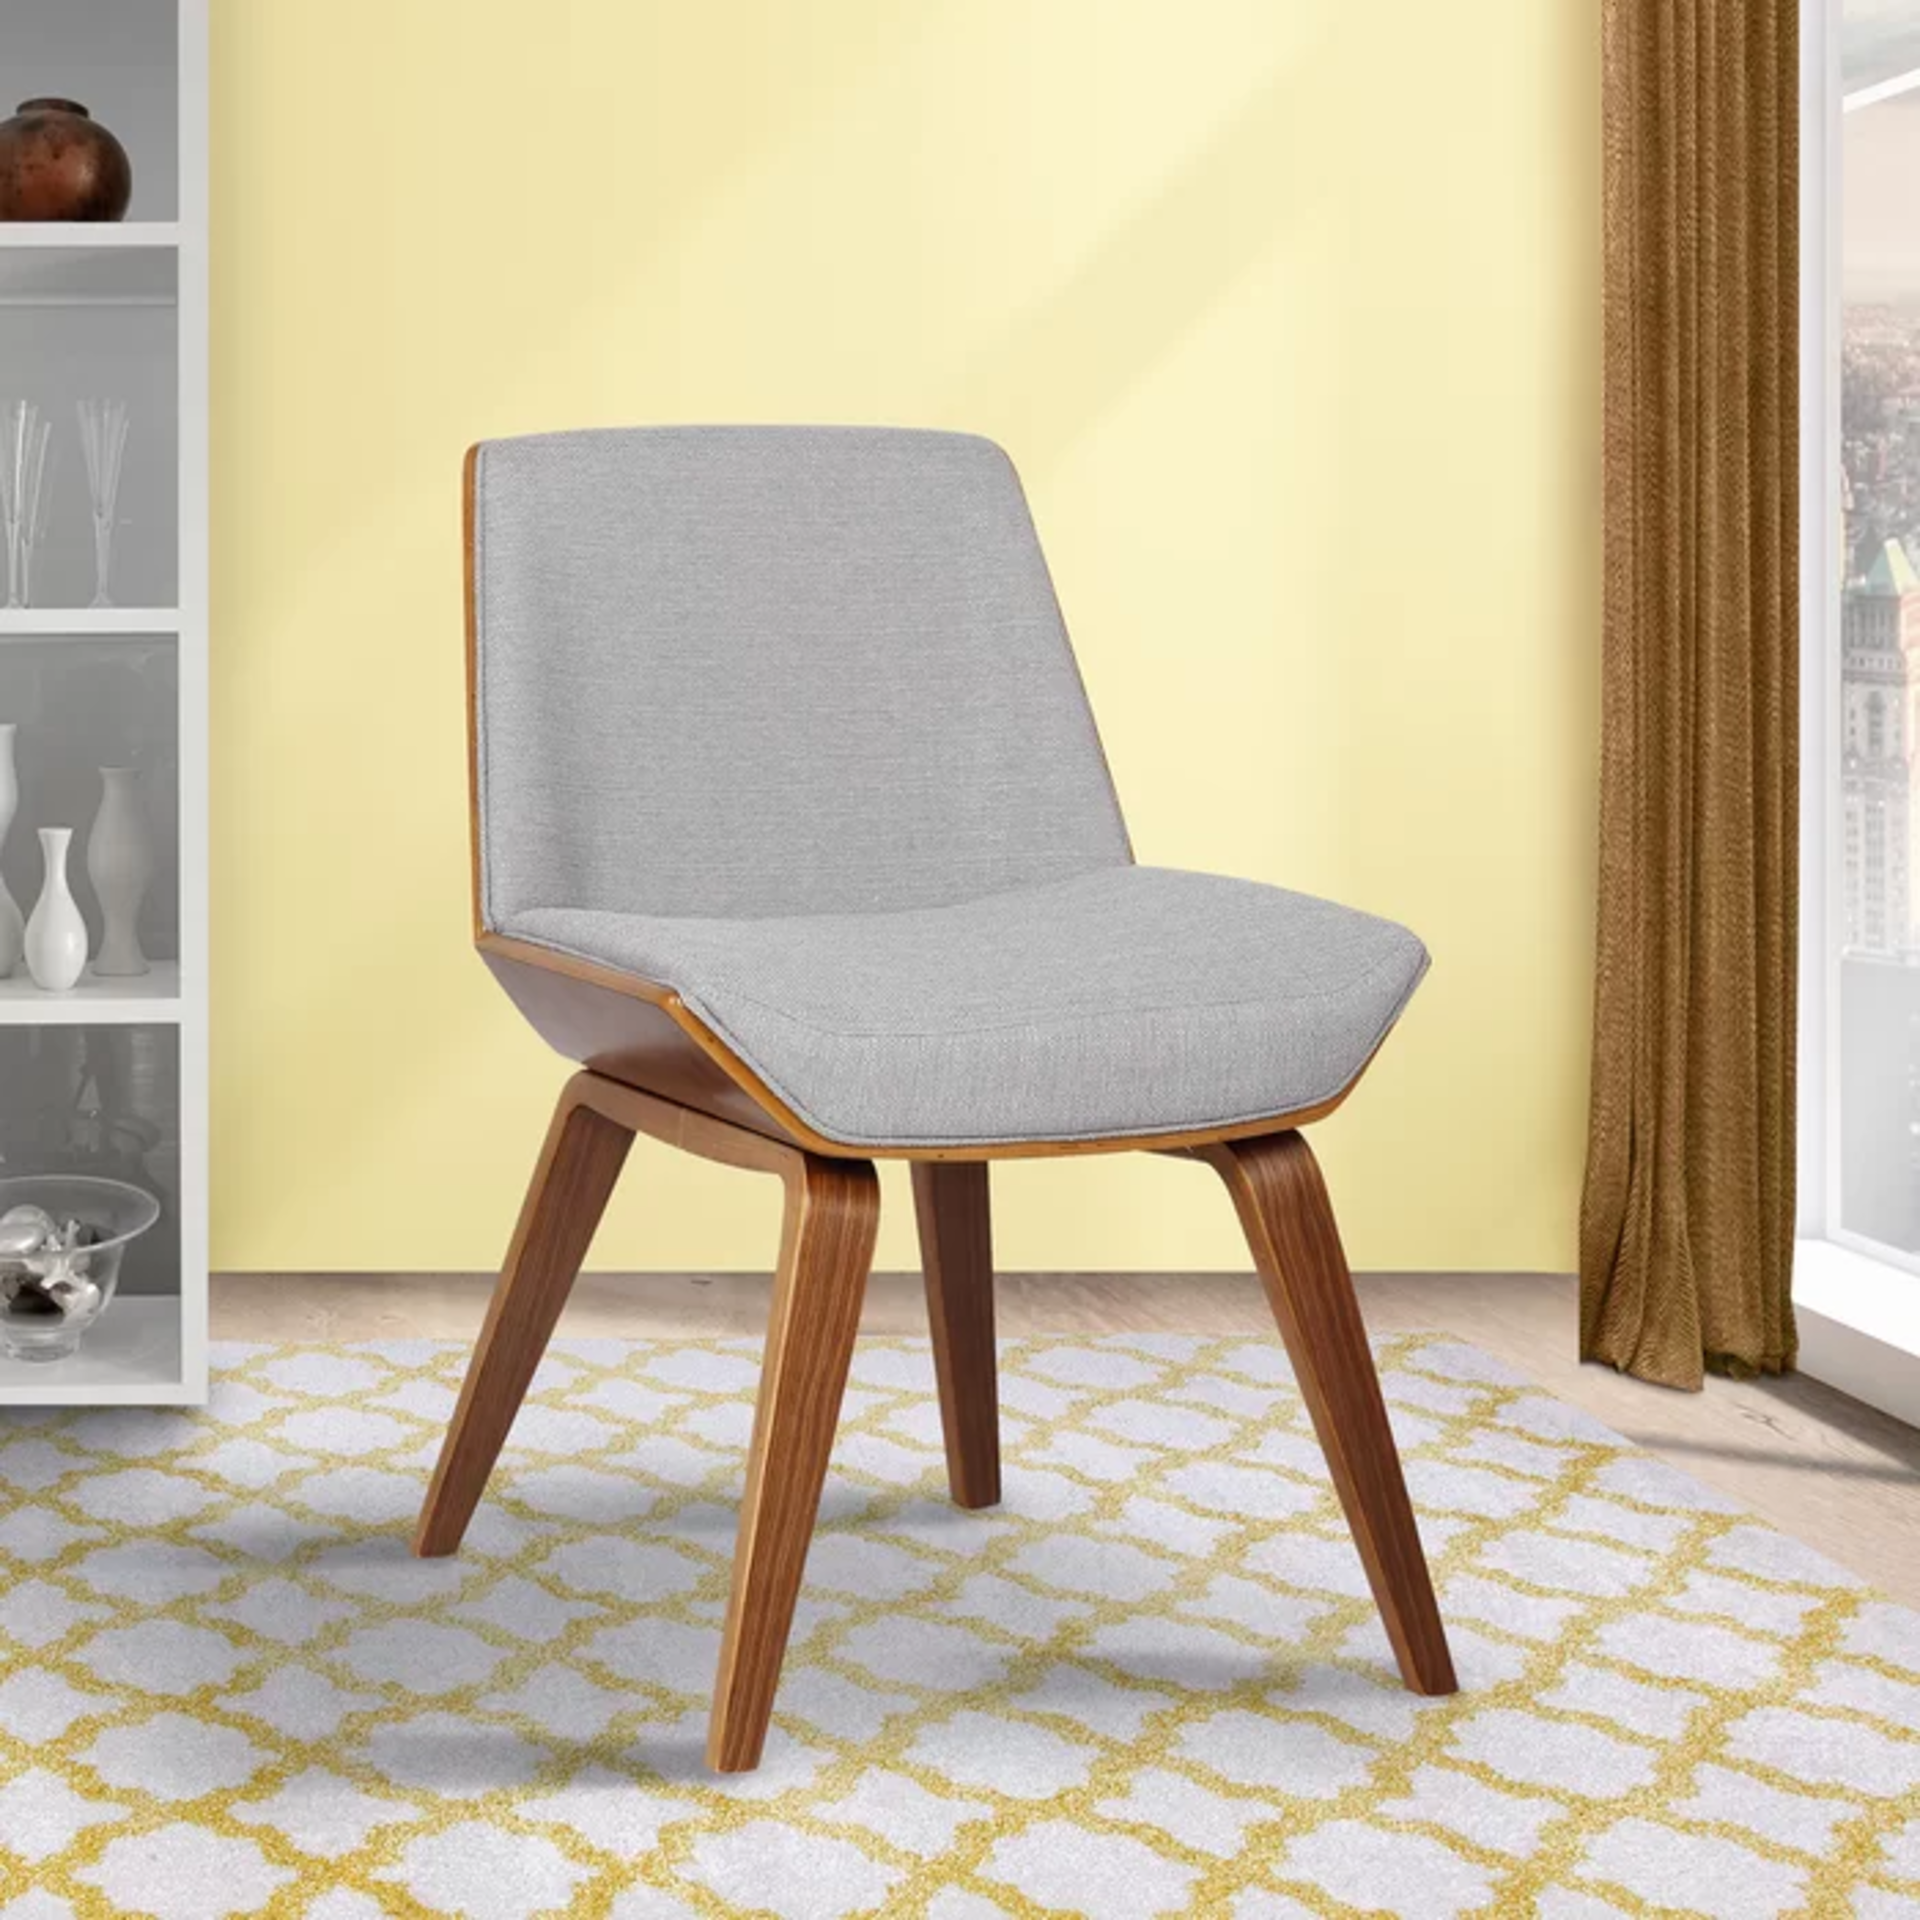 Walnut Upholstered Dining Chair Mix A Dash Of Mid-Century Modern Flair To Your Entertainment